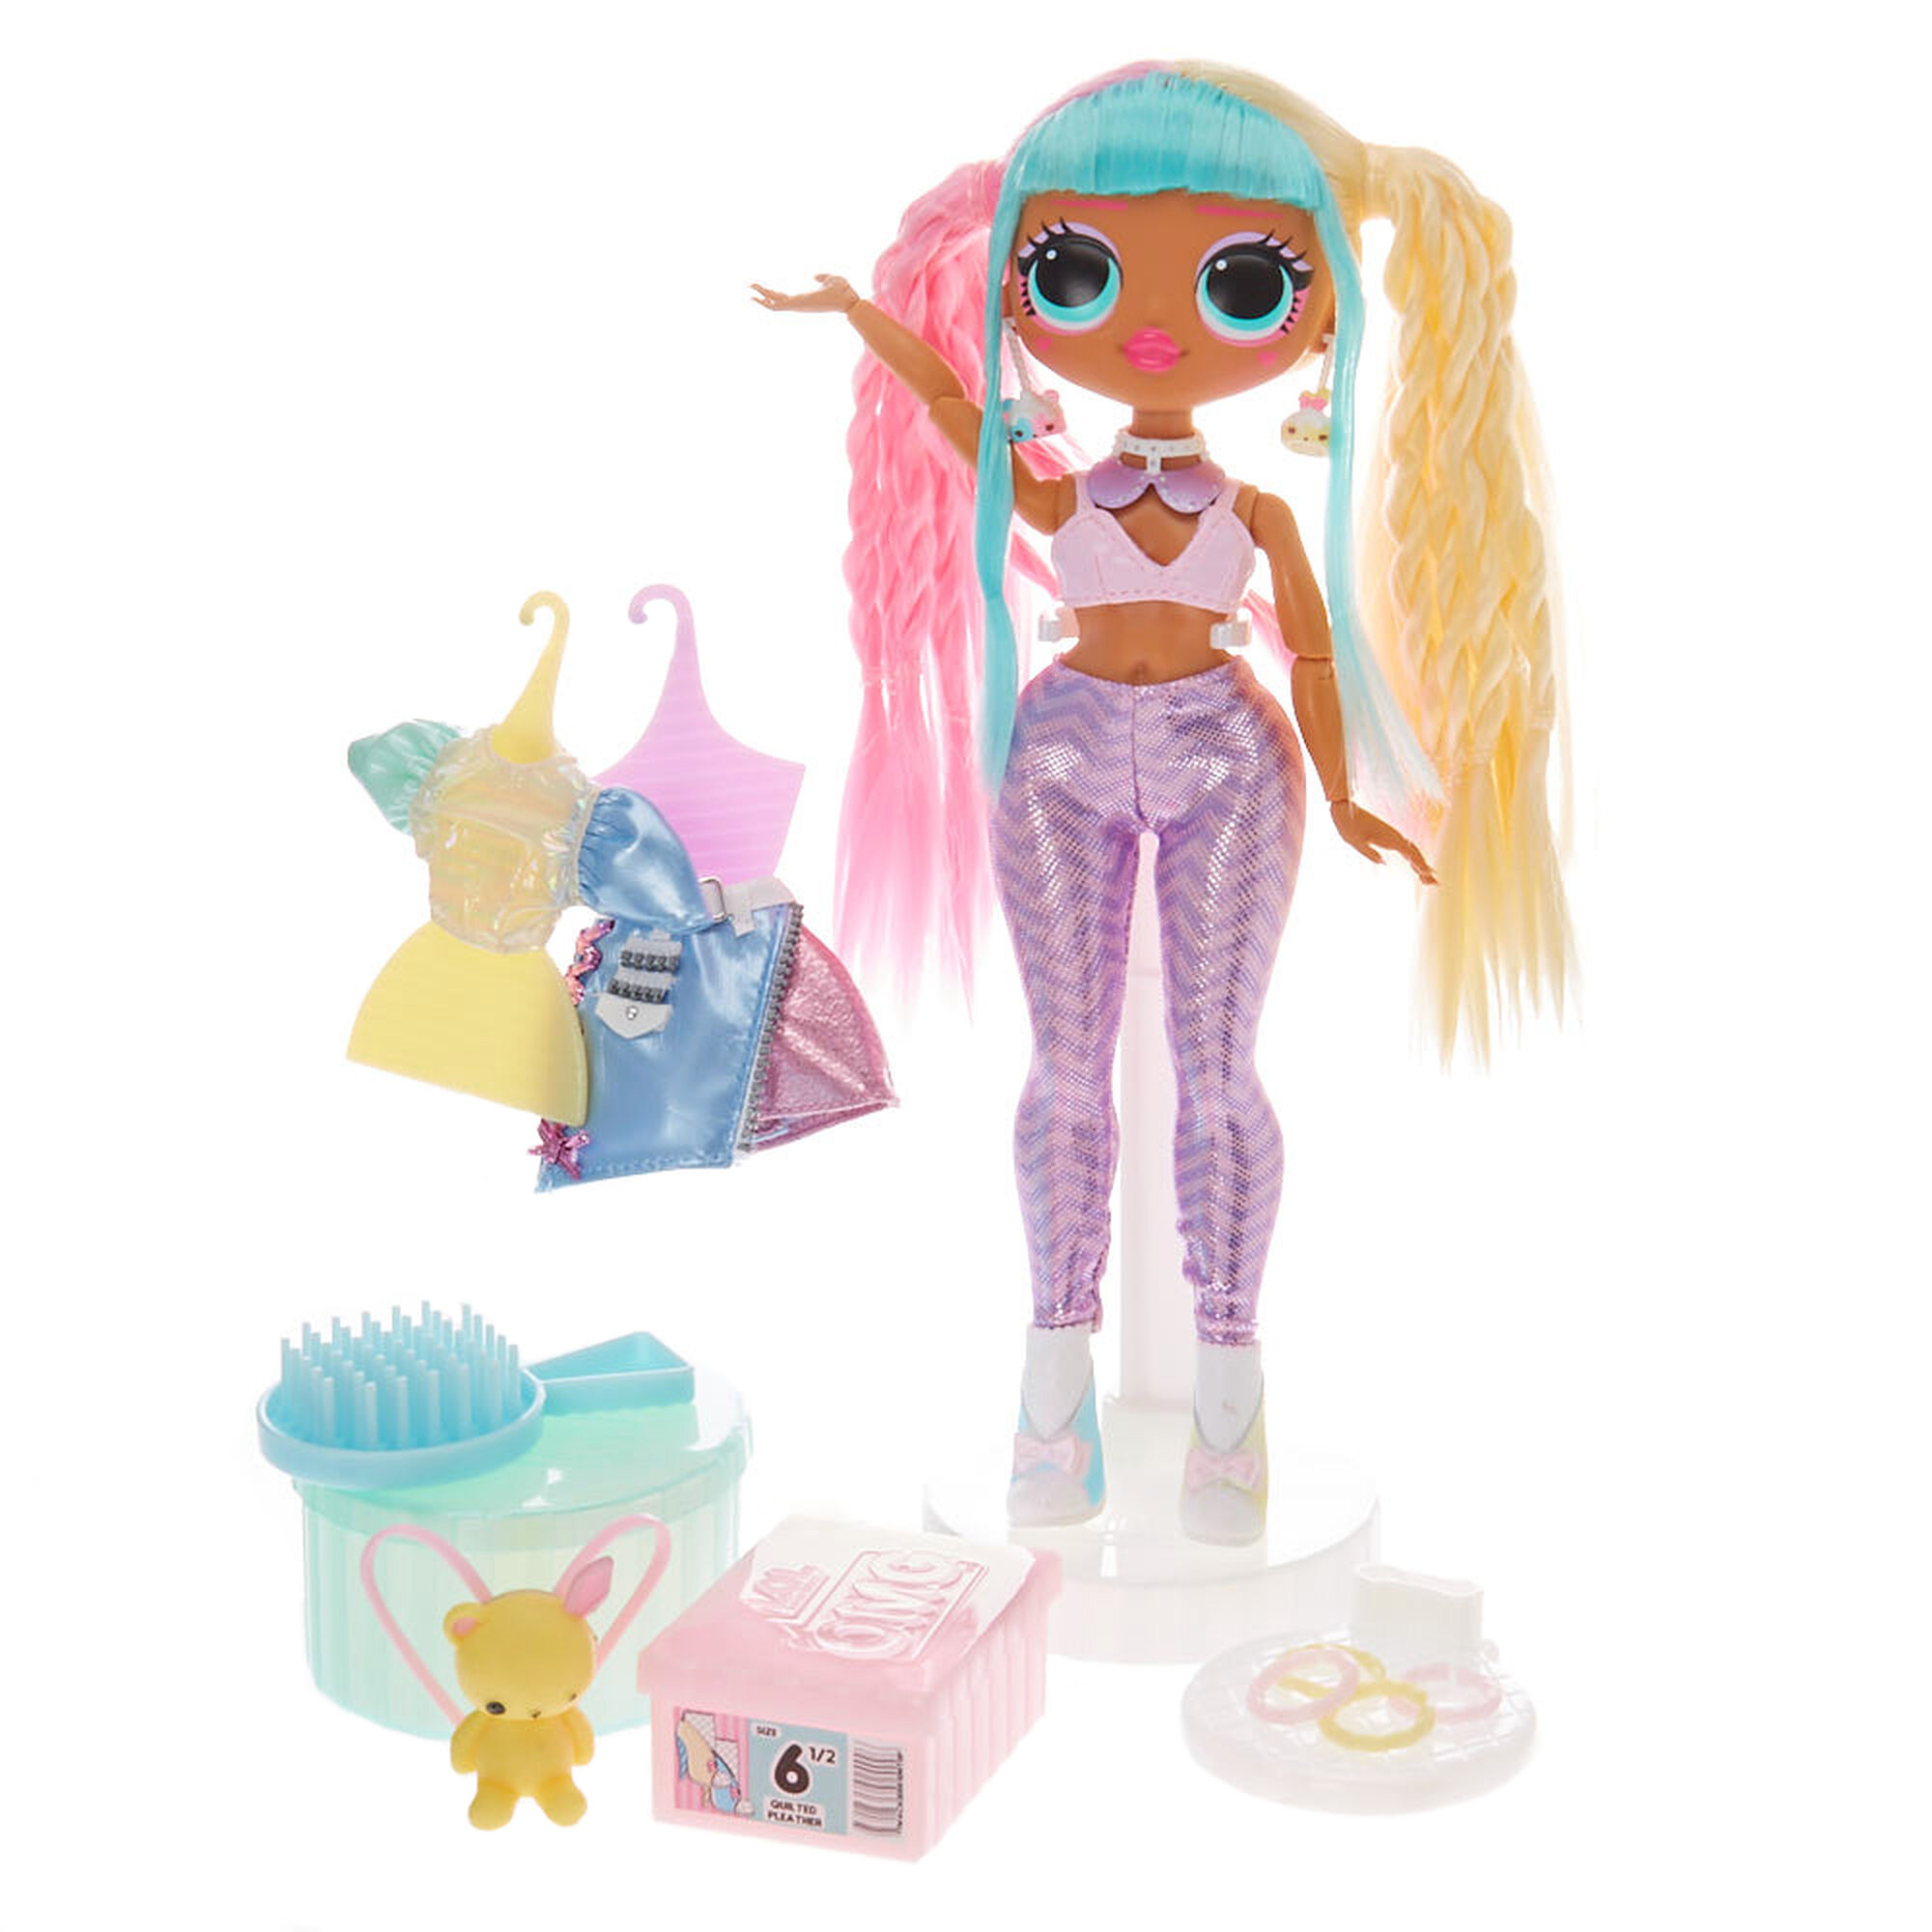 L.O.L. Surprise!™ O.M.G. Doll Series 2 - Styles May Vary | Claire's